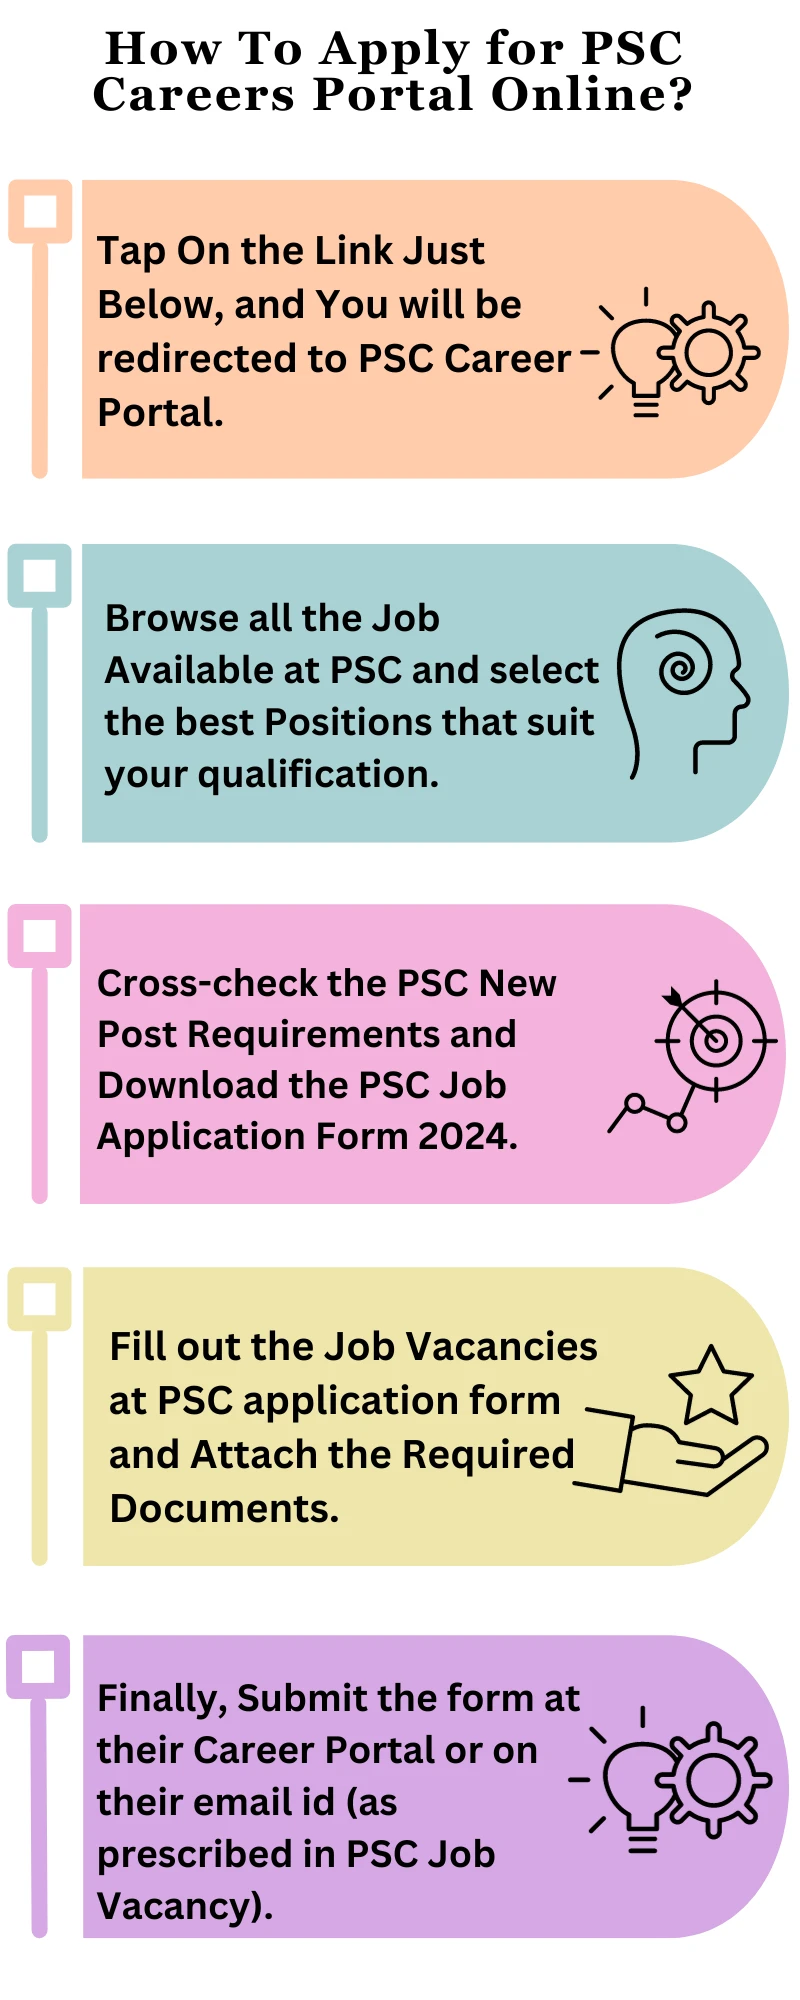 How To Apply for PSC Careers Portal Online?